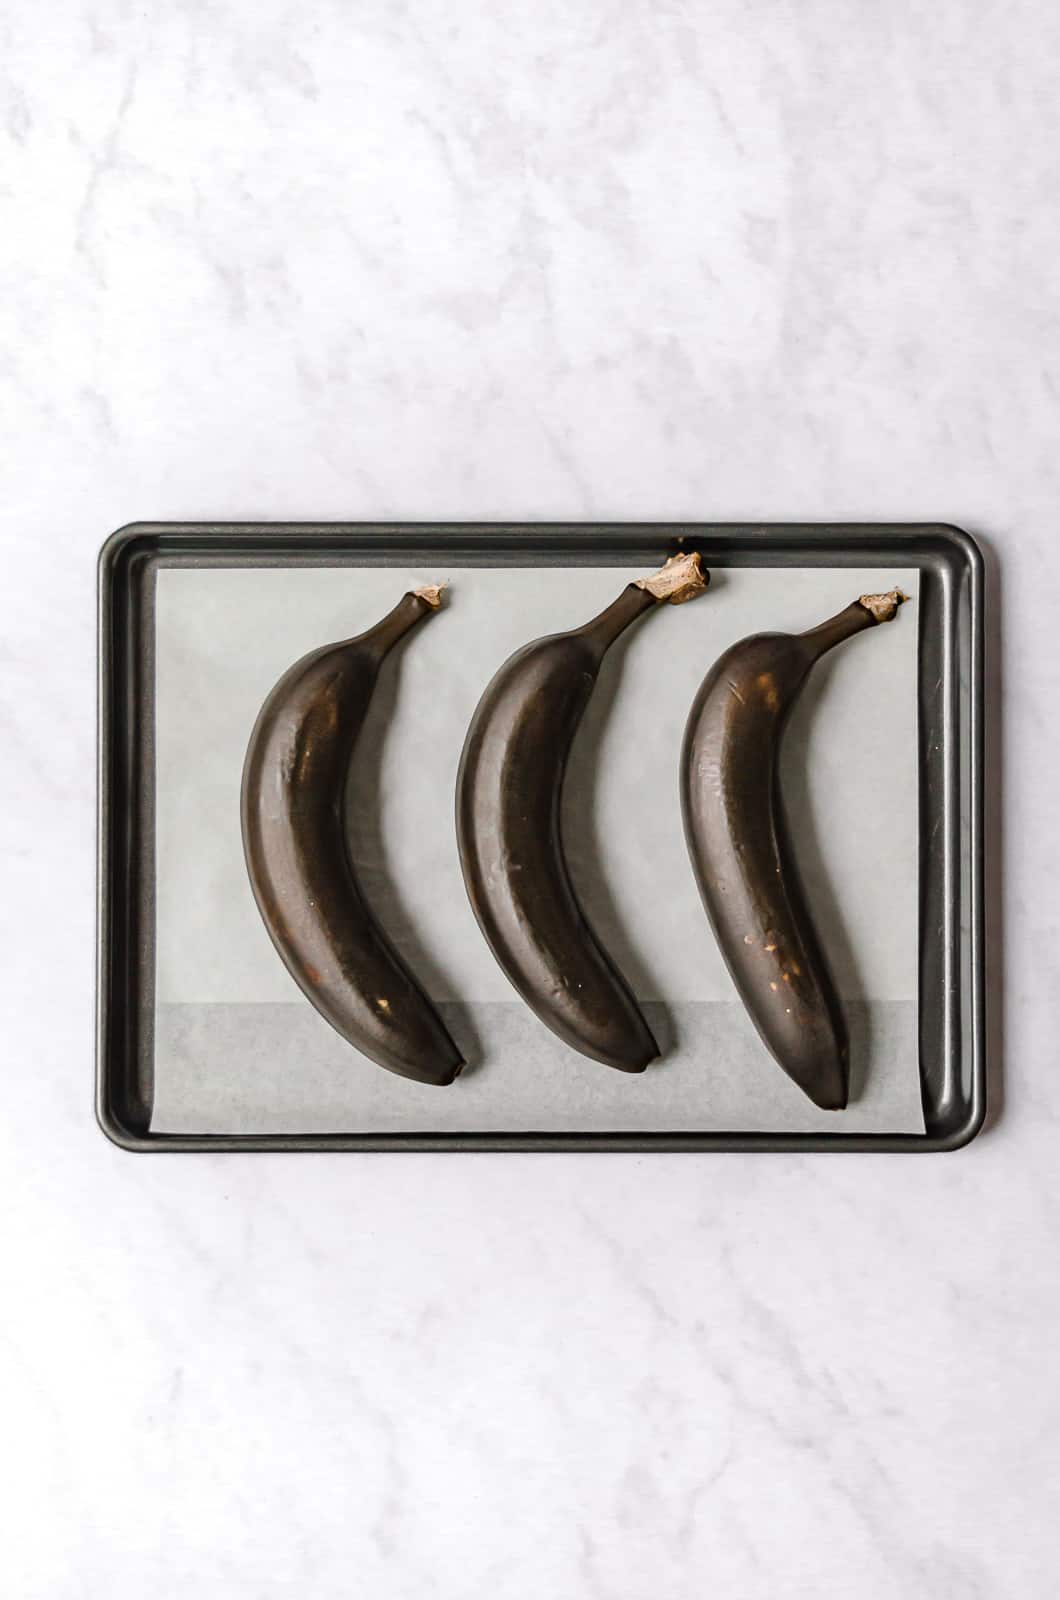 three roasted bananas on parchment lined baking sheet.